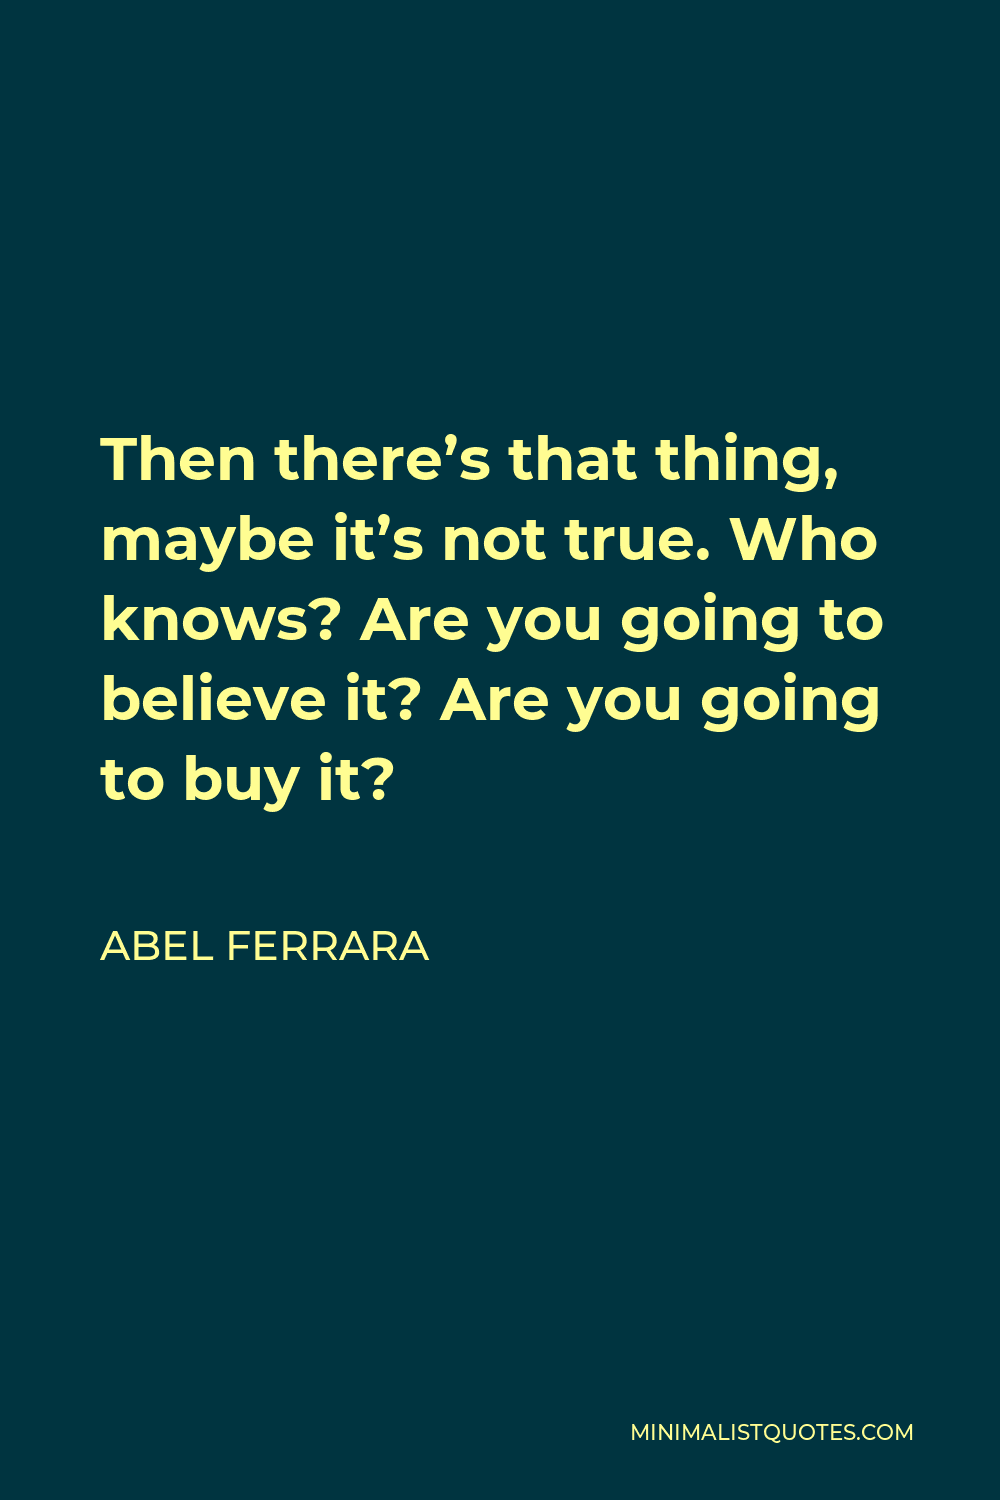 Abel Ferrara Quote - Then there’s that thing, maybe it’s not true. Who knows? Are you going to believe it? Are you going to buy it?